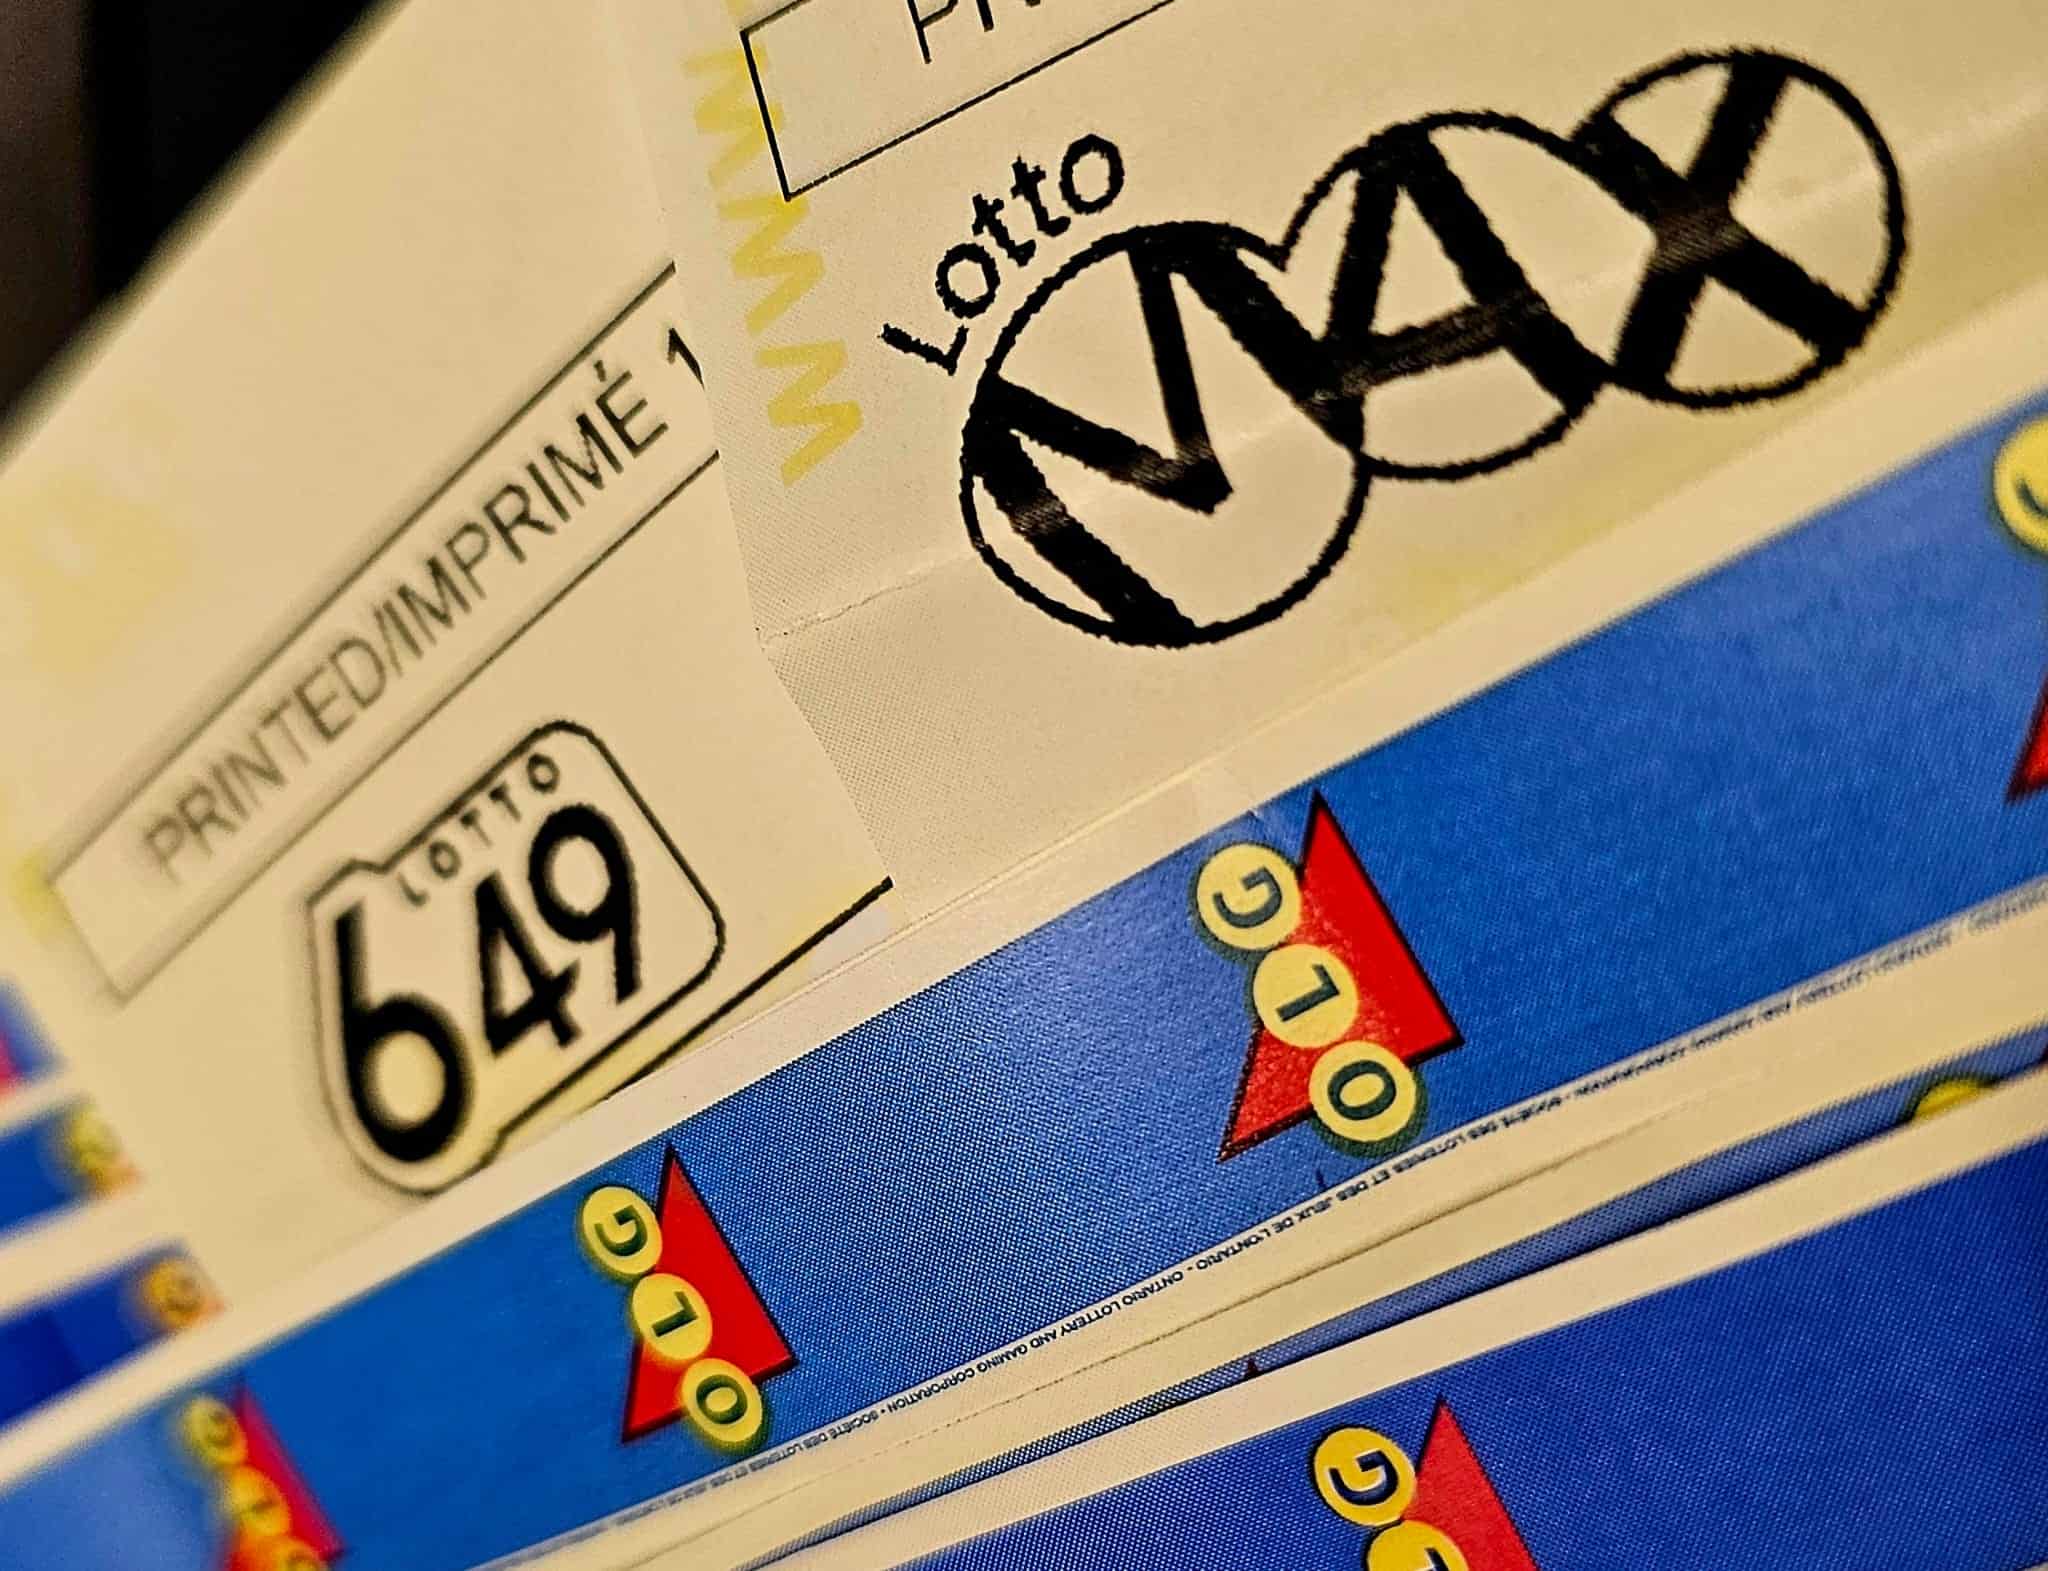 Over $115 million in lotteries are up for grabs this week in Canada